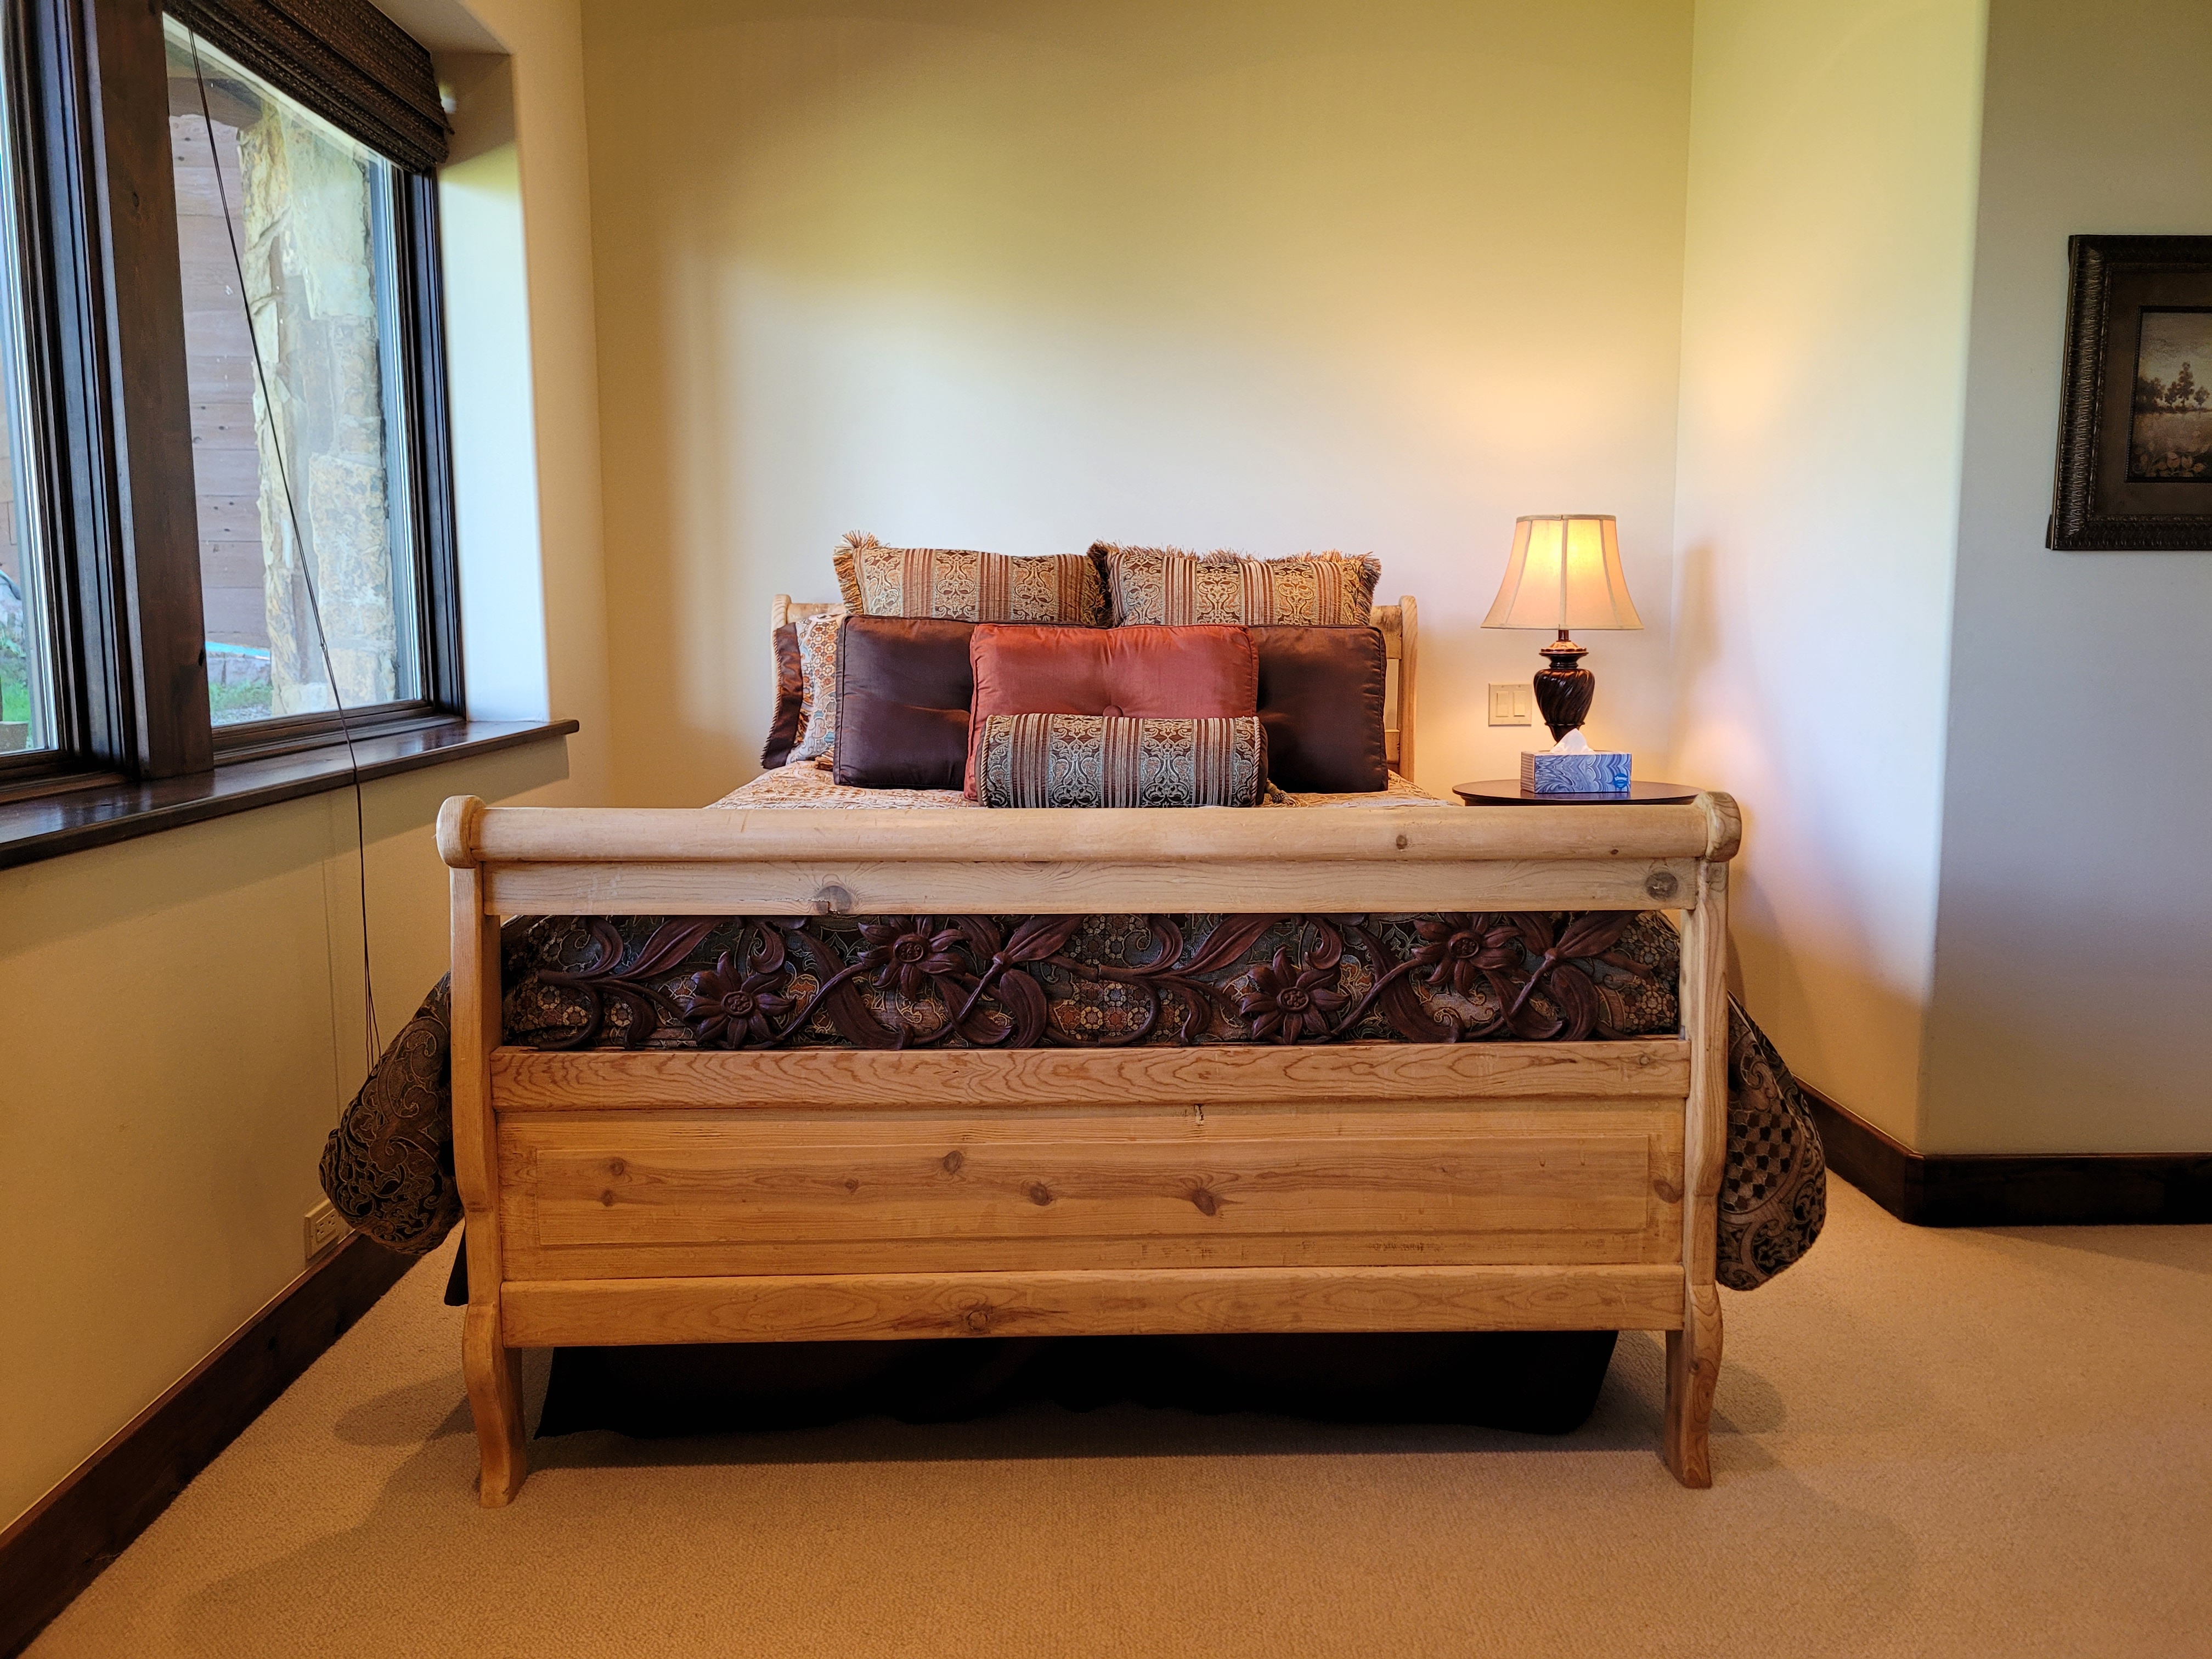 Bedroom with sleigh bed frame and decorative pillows